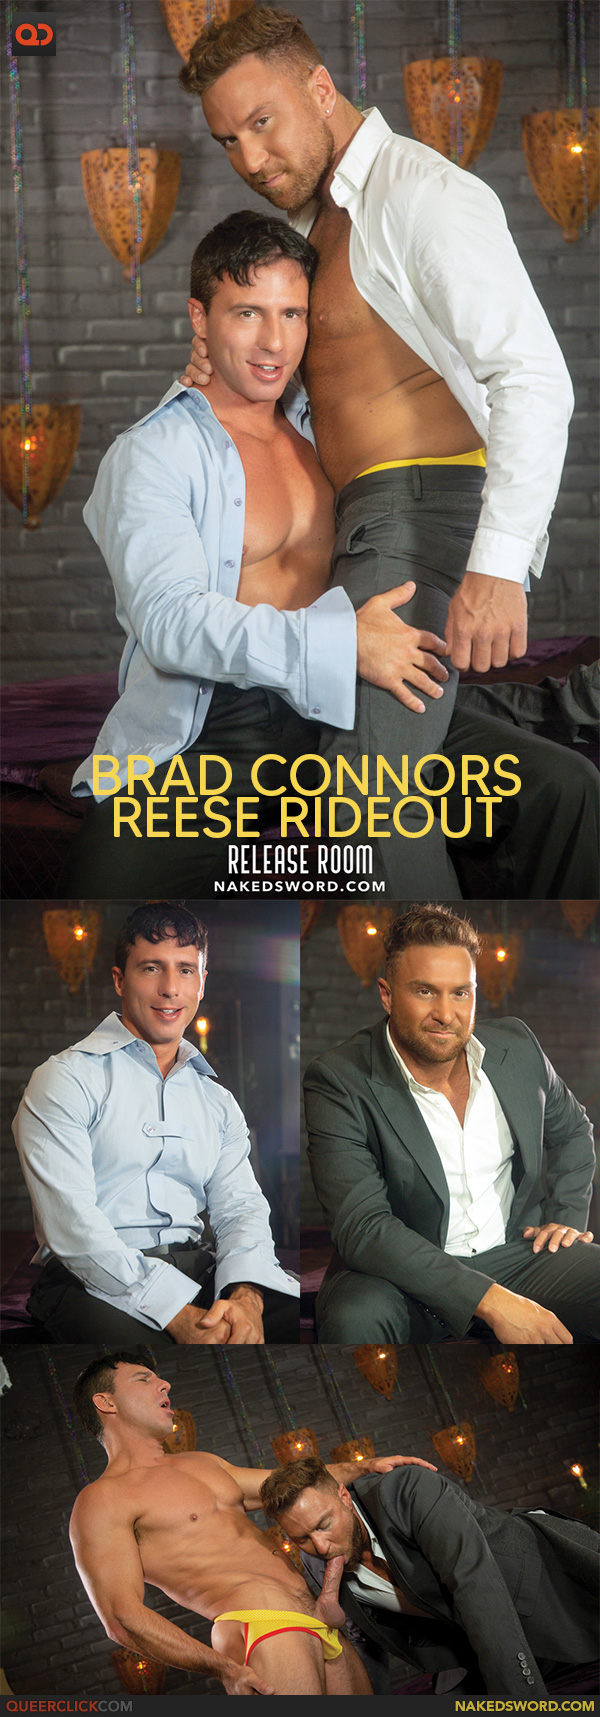 Naked Sword: Reese Rideout and Brad Connors - Release Room, Scene 5